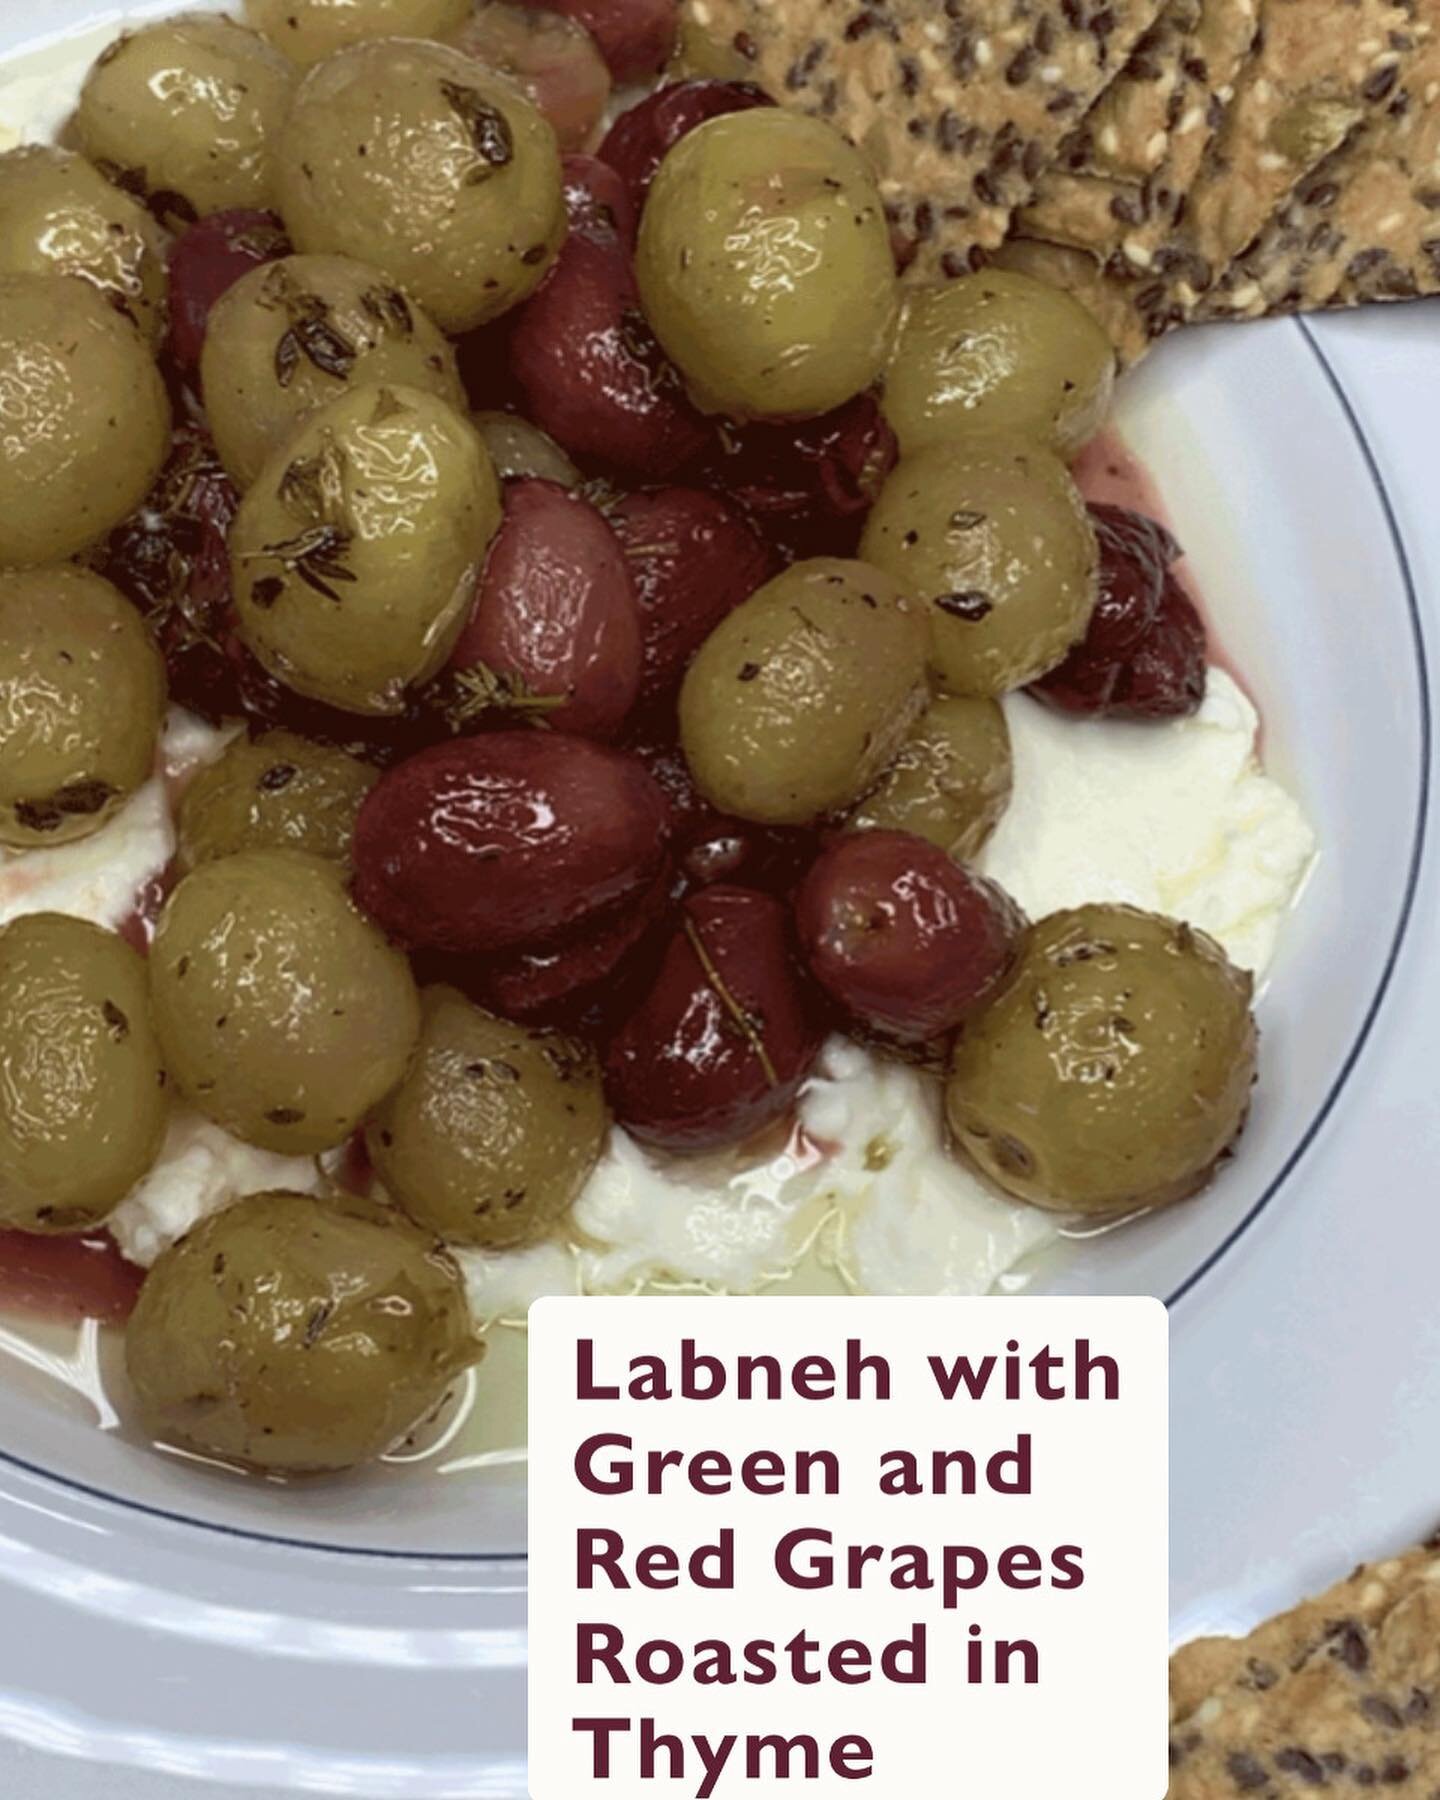 Recipe to share with you!

Labneh with Green and Red Grapes Roasted in Thyme.

This dip combines smooth labneh with grapes that have been gently roasted in thyme - making this combination a decadent, creamy and rich appetiser.

Labneh is a very thick